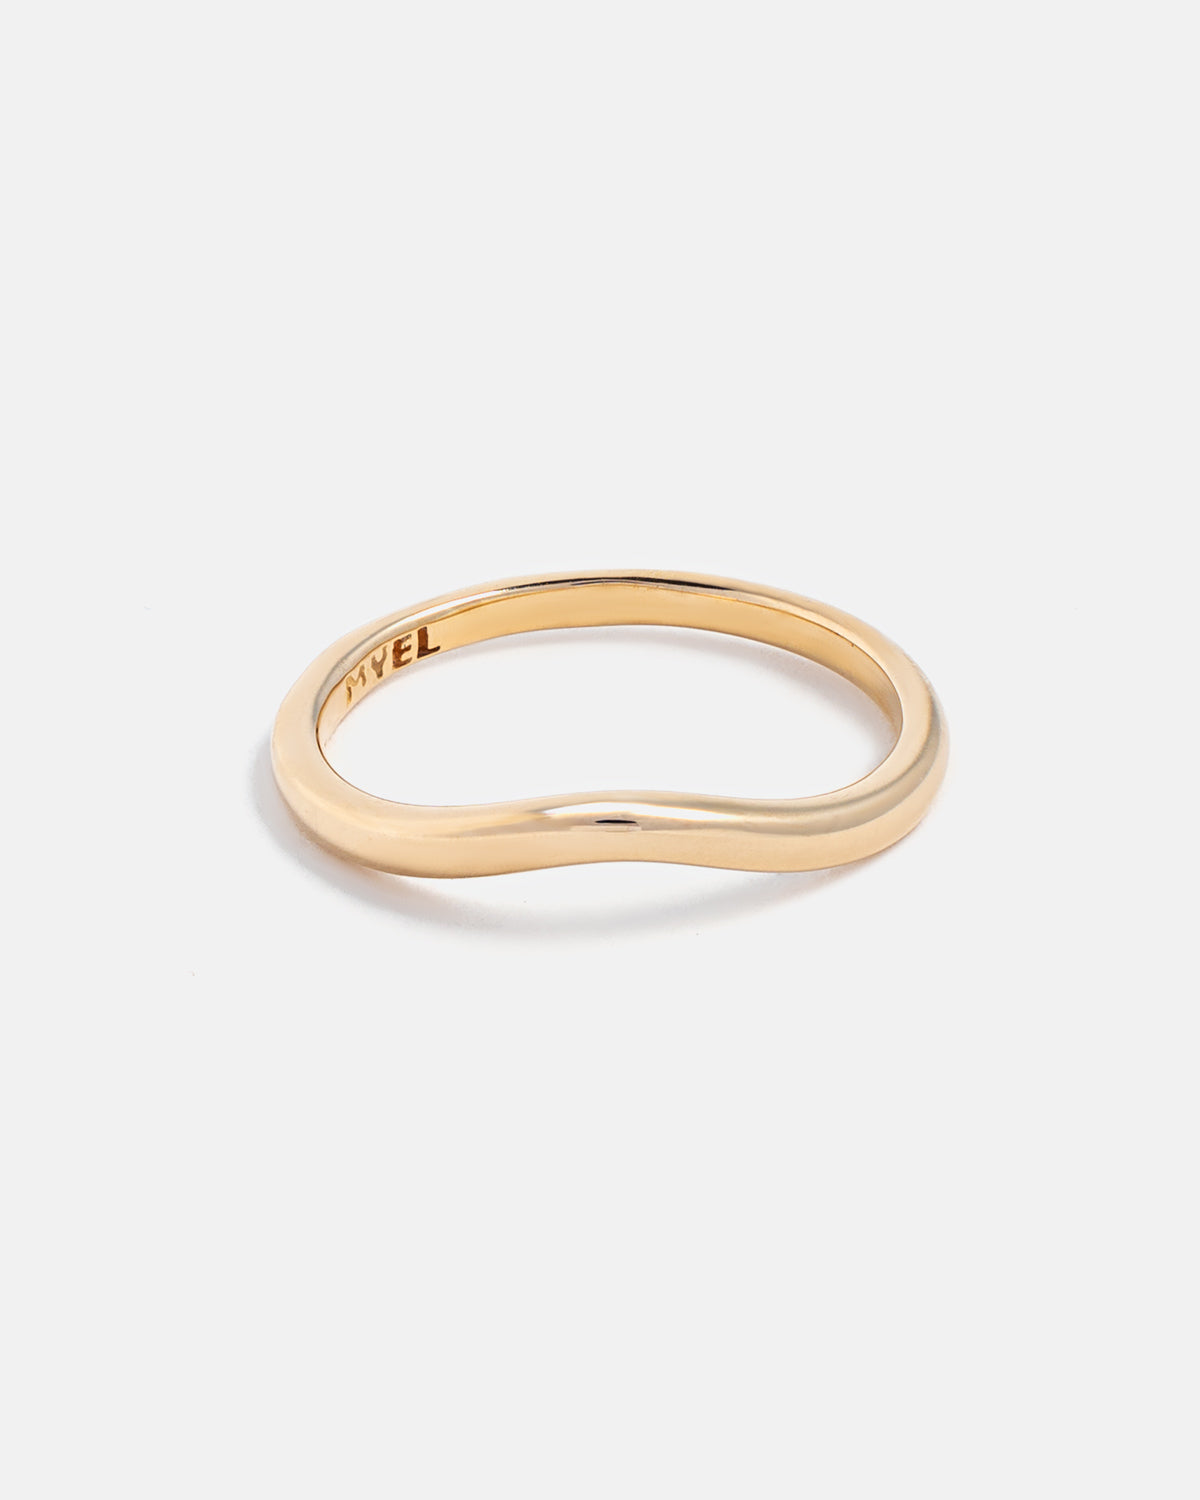 Stratura Wave Wedding Ring in Gold without stone